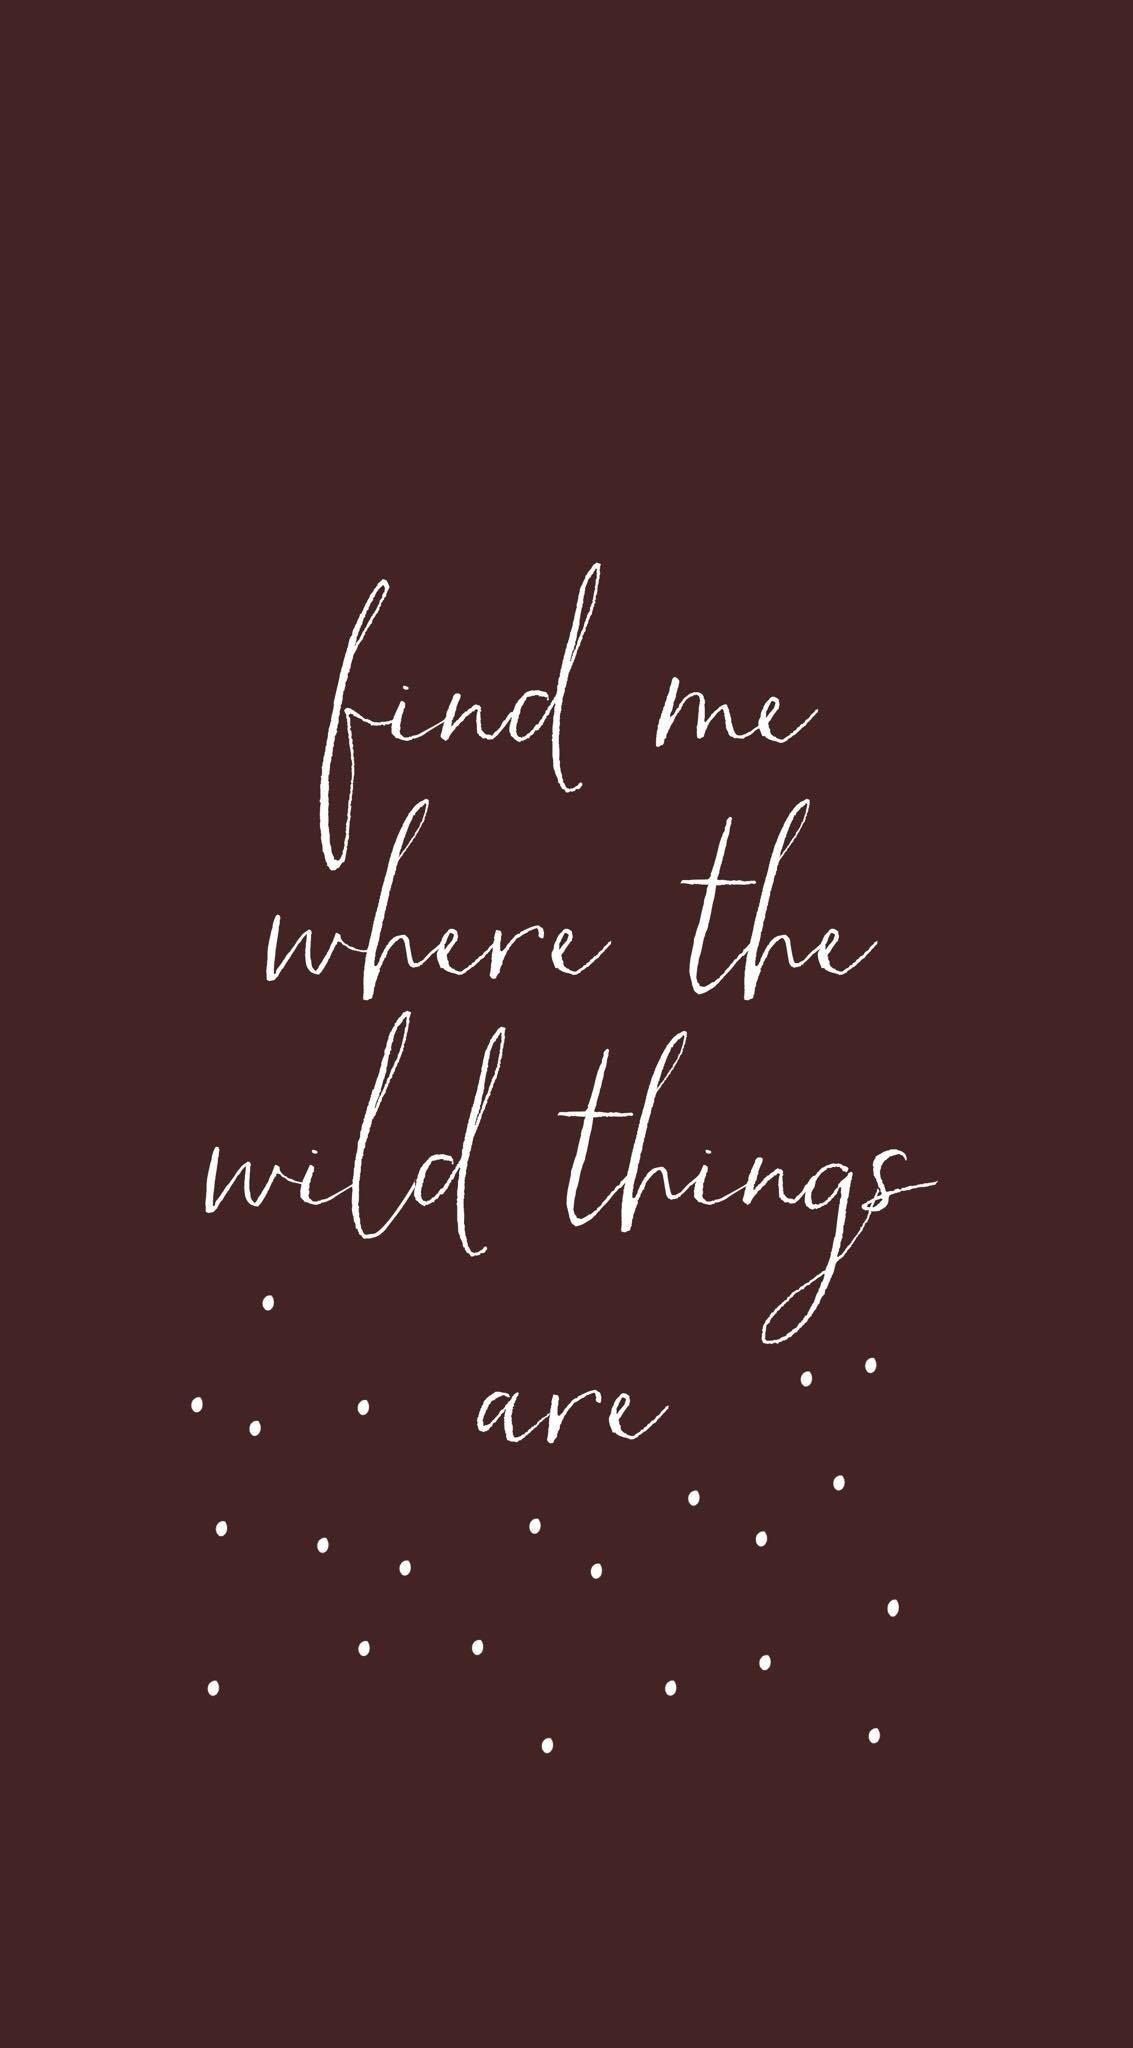 Find me where the wild things are. #explore. Phone quotes, Wallpaper quotes, Quotes